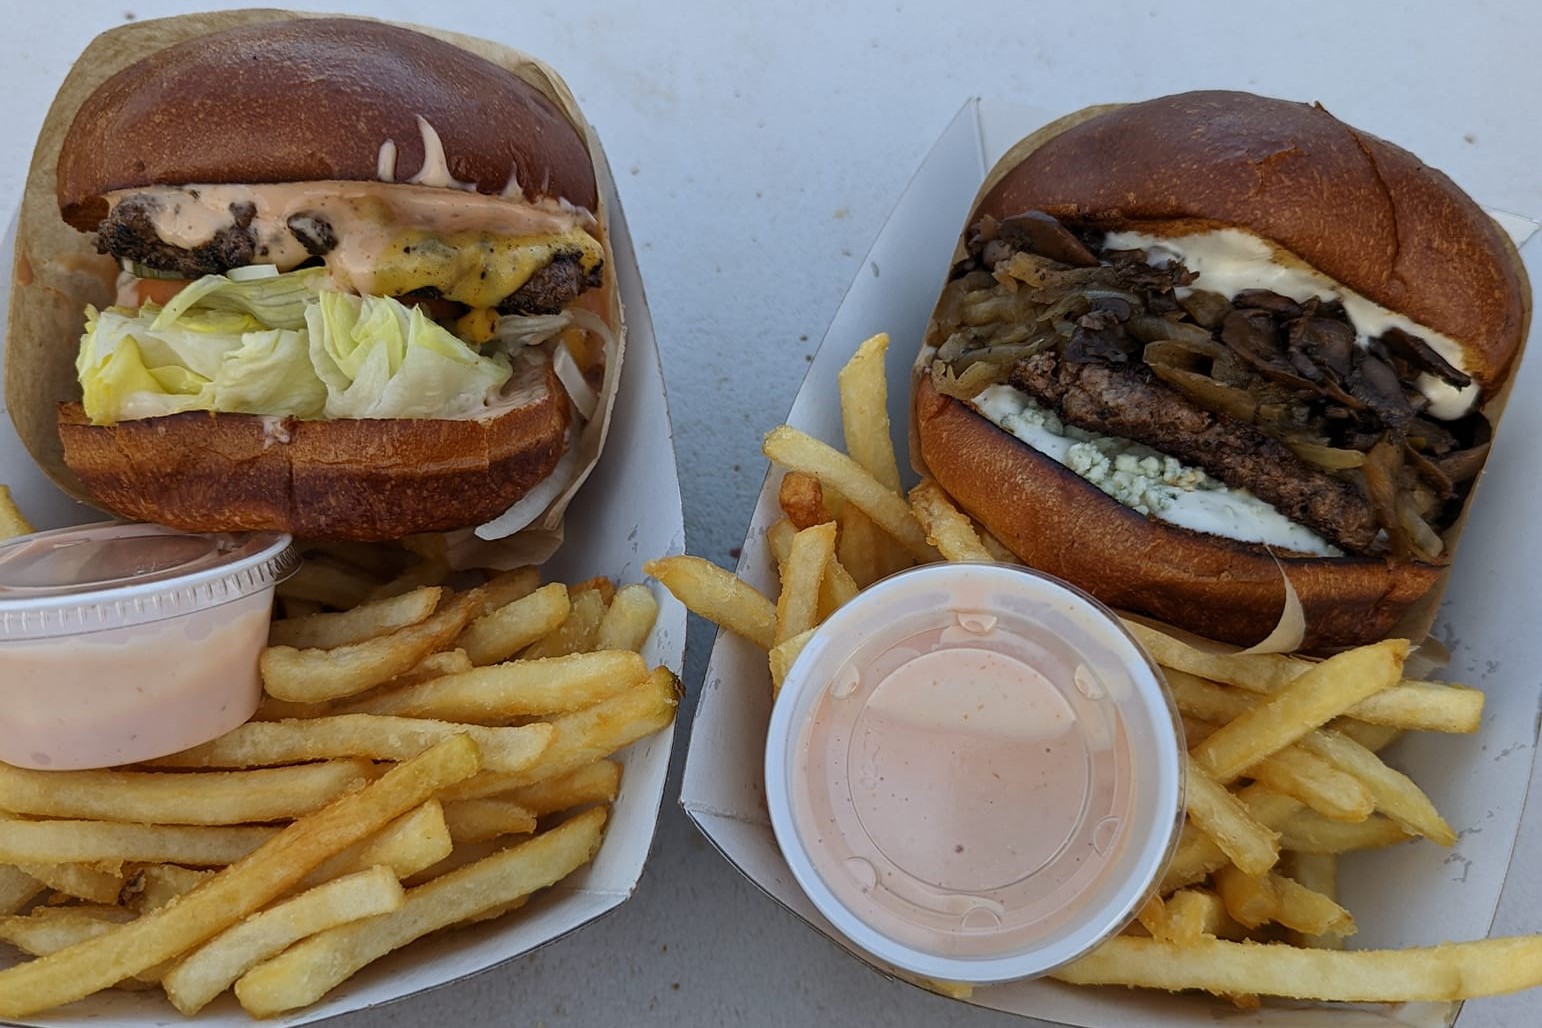 Burgers from the Capitol Burgers Food Truck